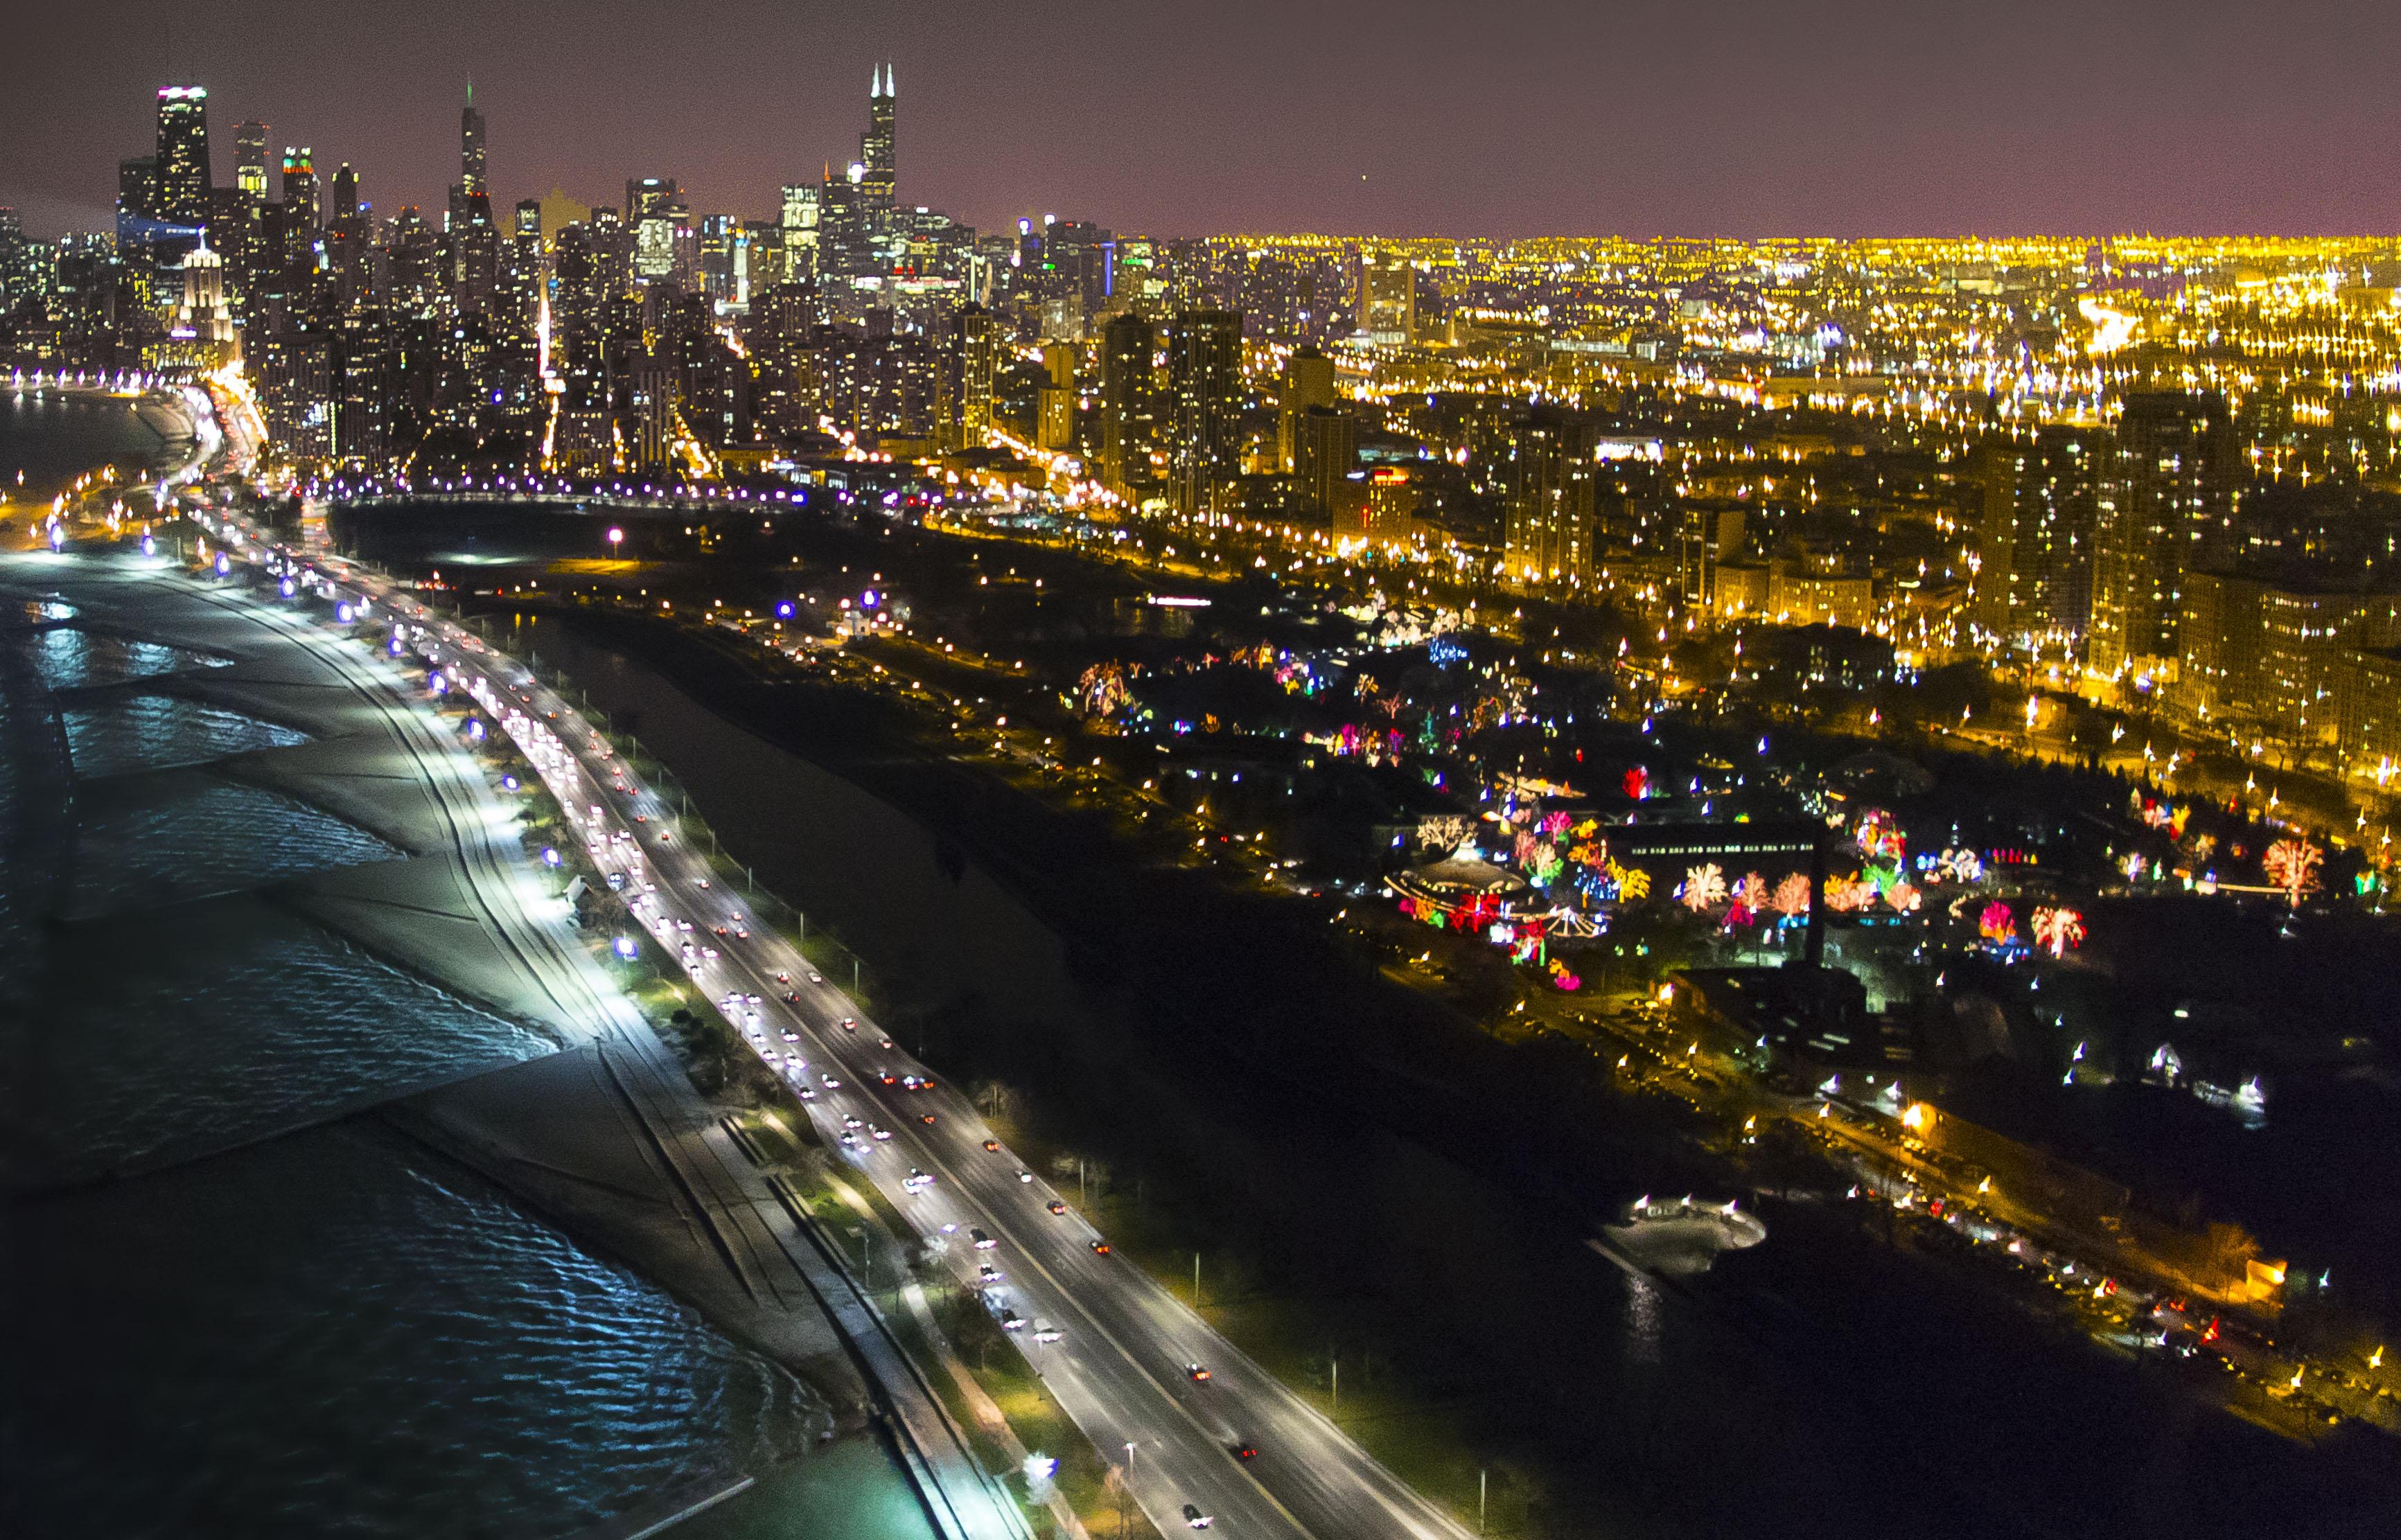 Fly over the city for illuminating views. (Courtesy Chicago Helicopter Experience)